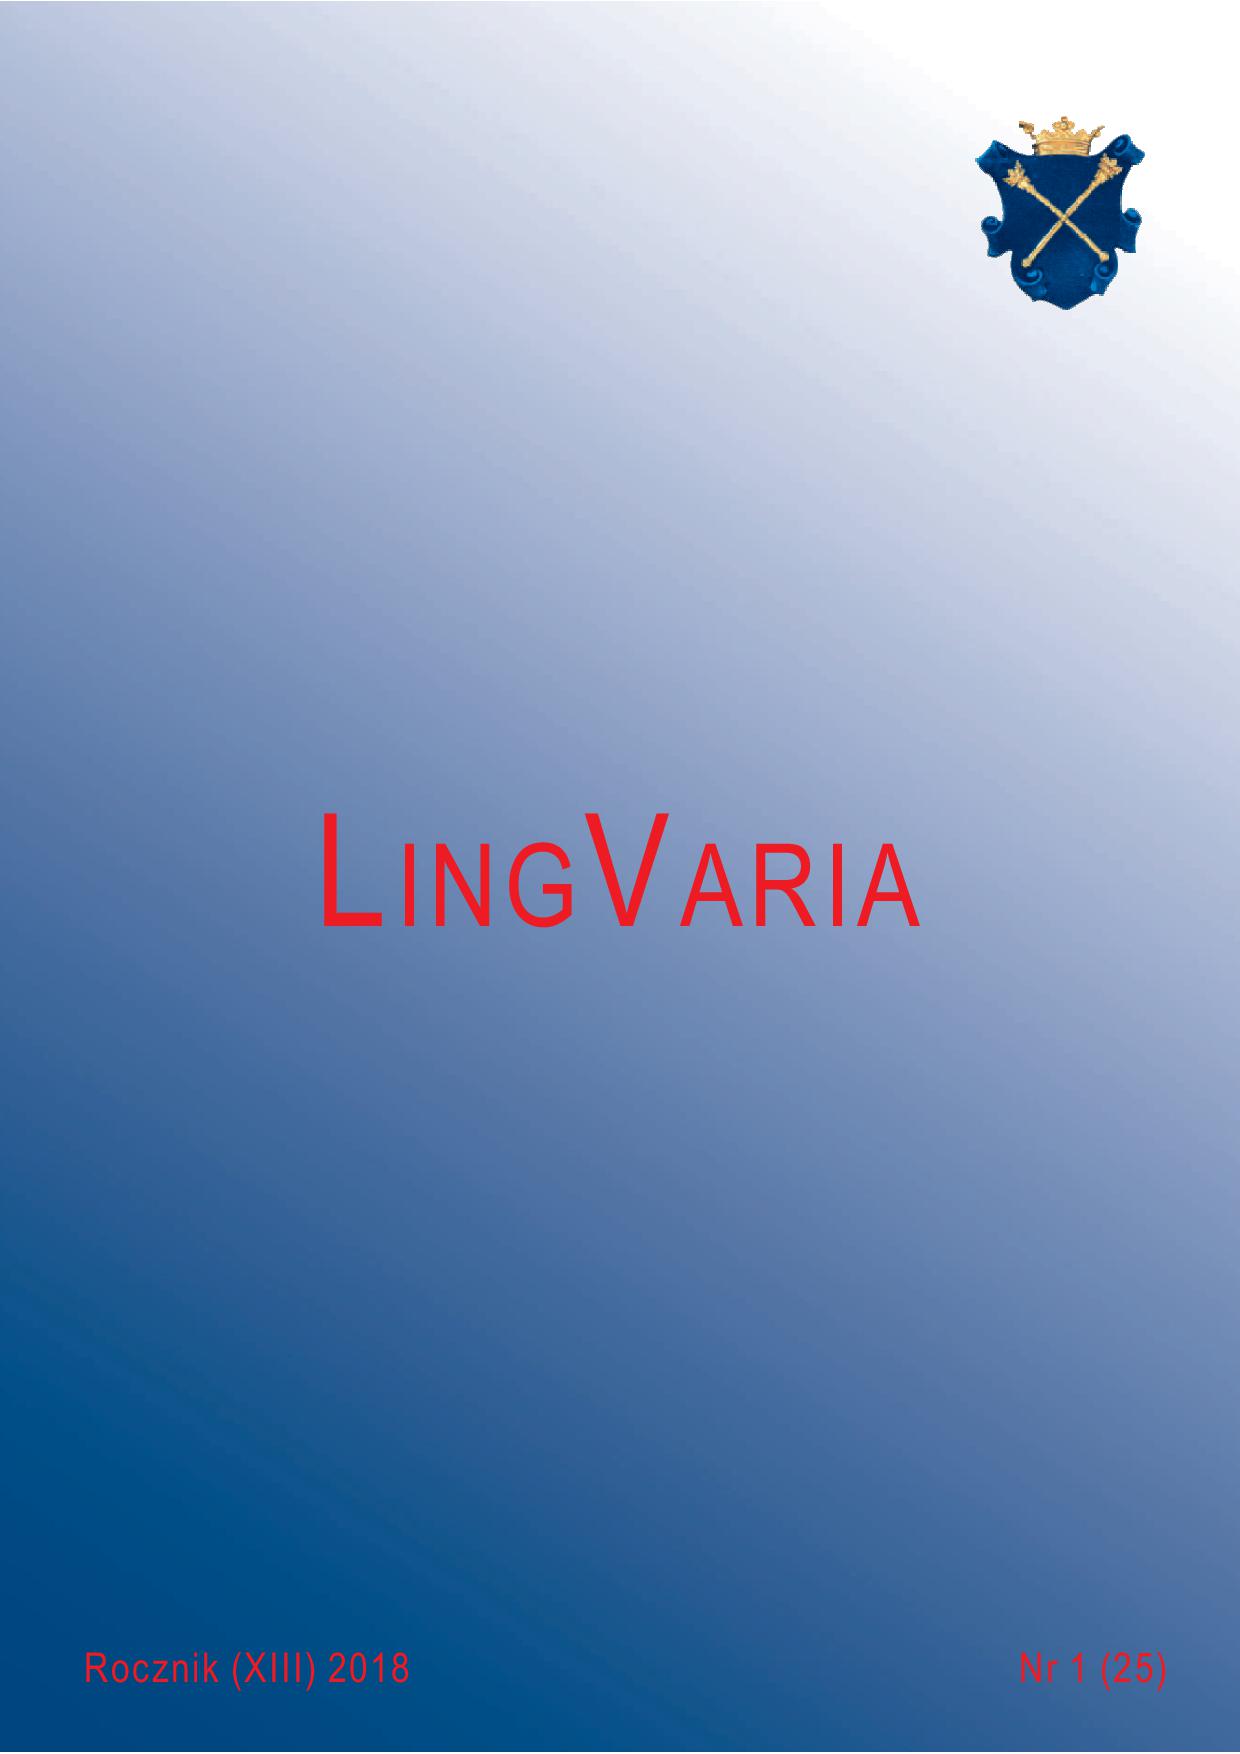 Remarks on the elision of labial consonants in contemporary Polish media Cover Image